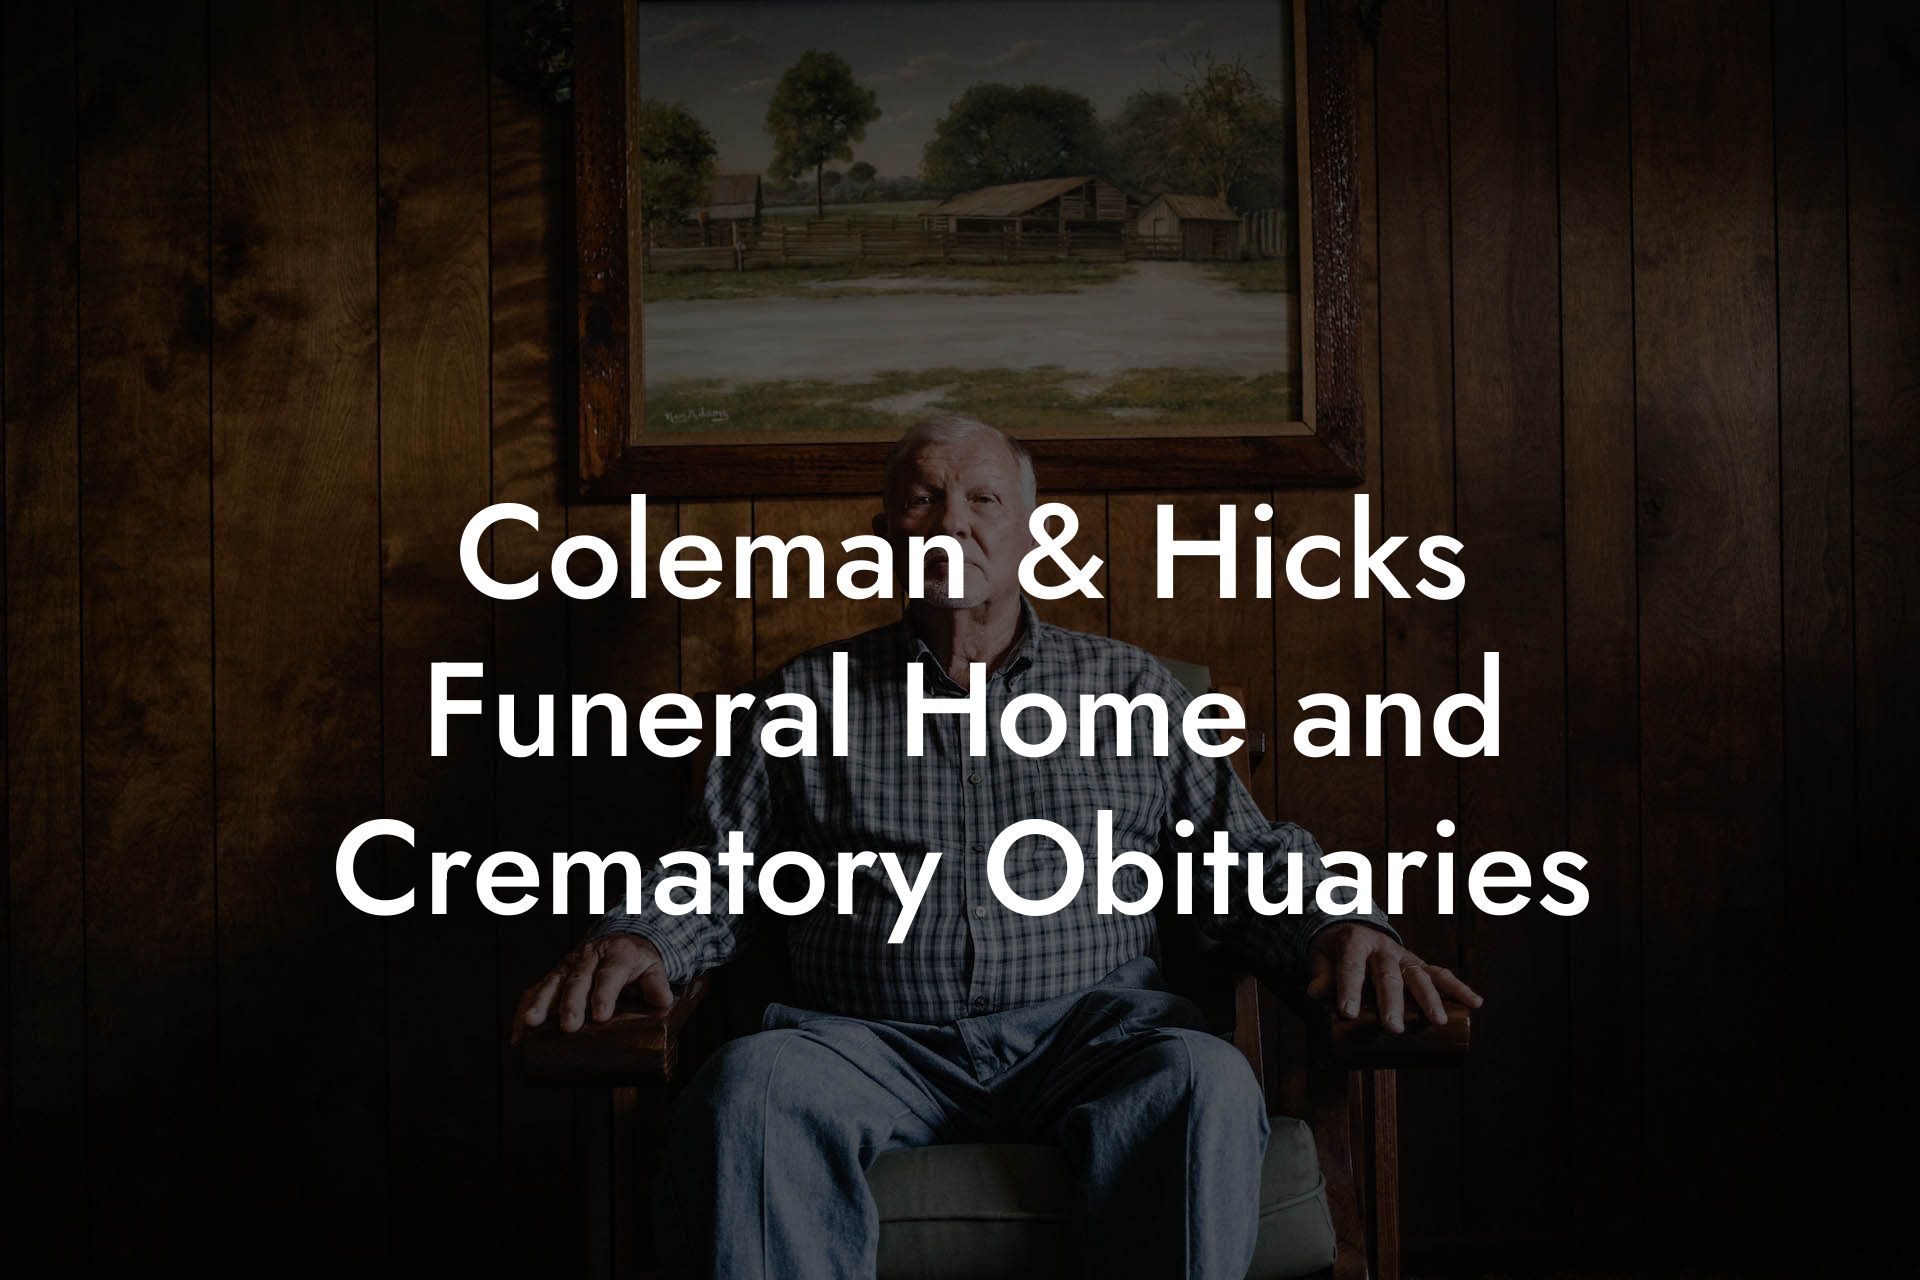 Coleman & Hicks Funeral Home and Crematory Obituaries